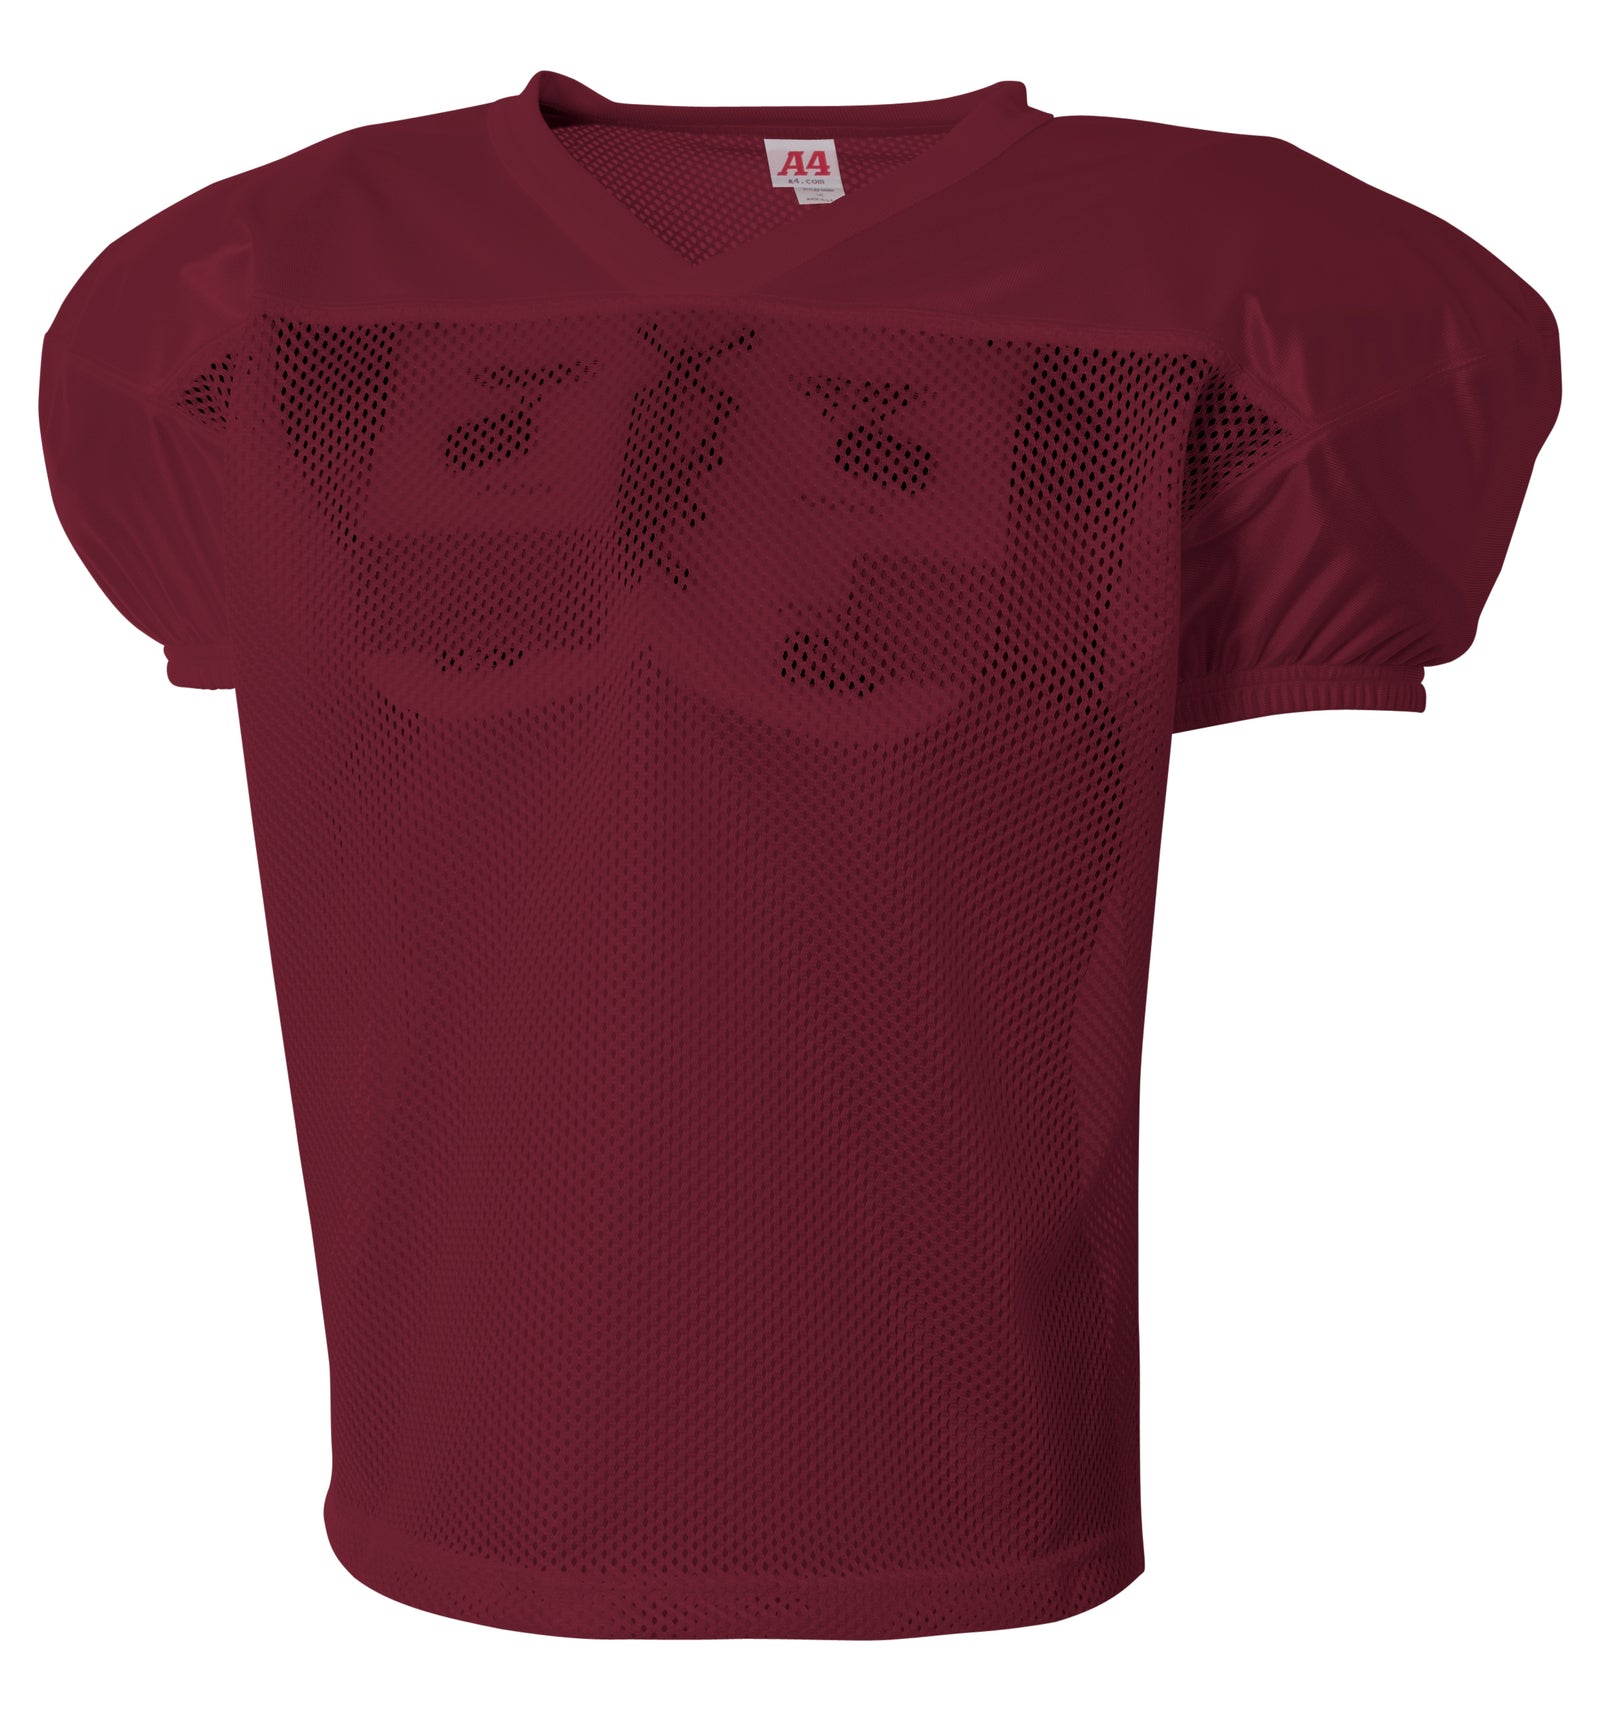 Maroon A4 Drills Practice Jersey